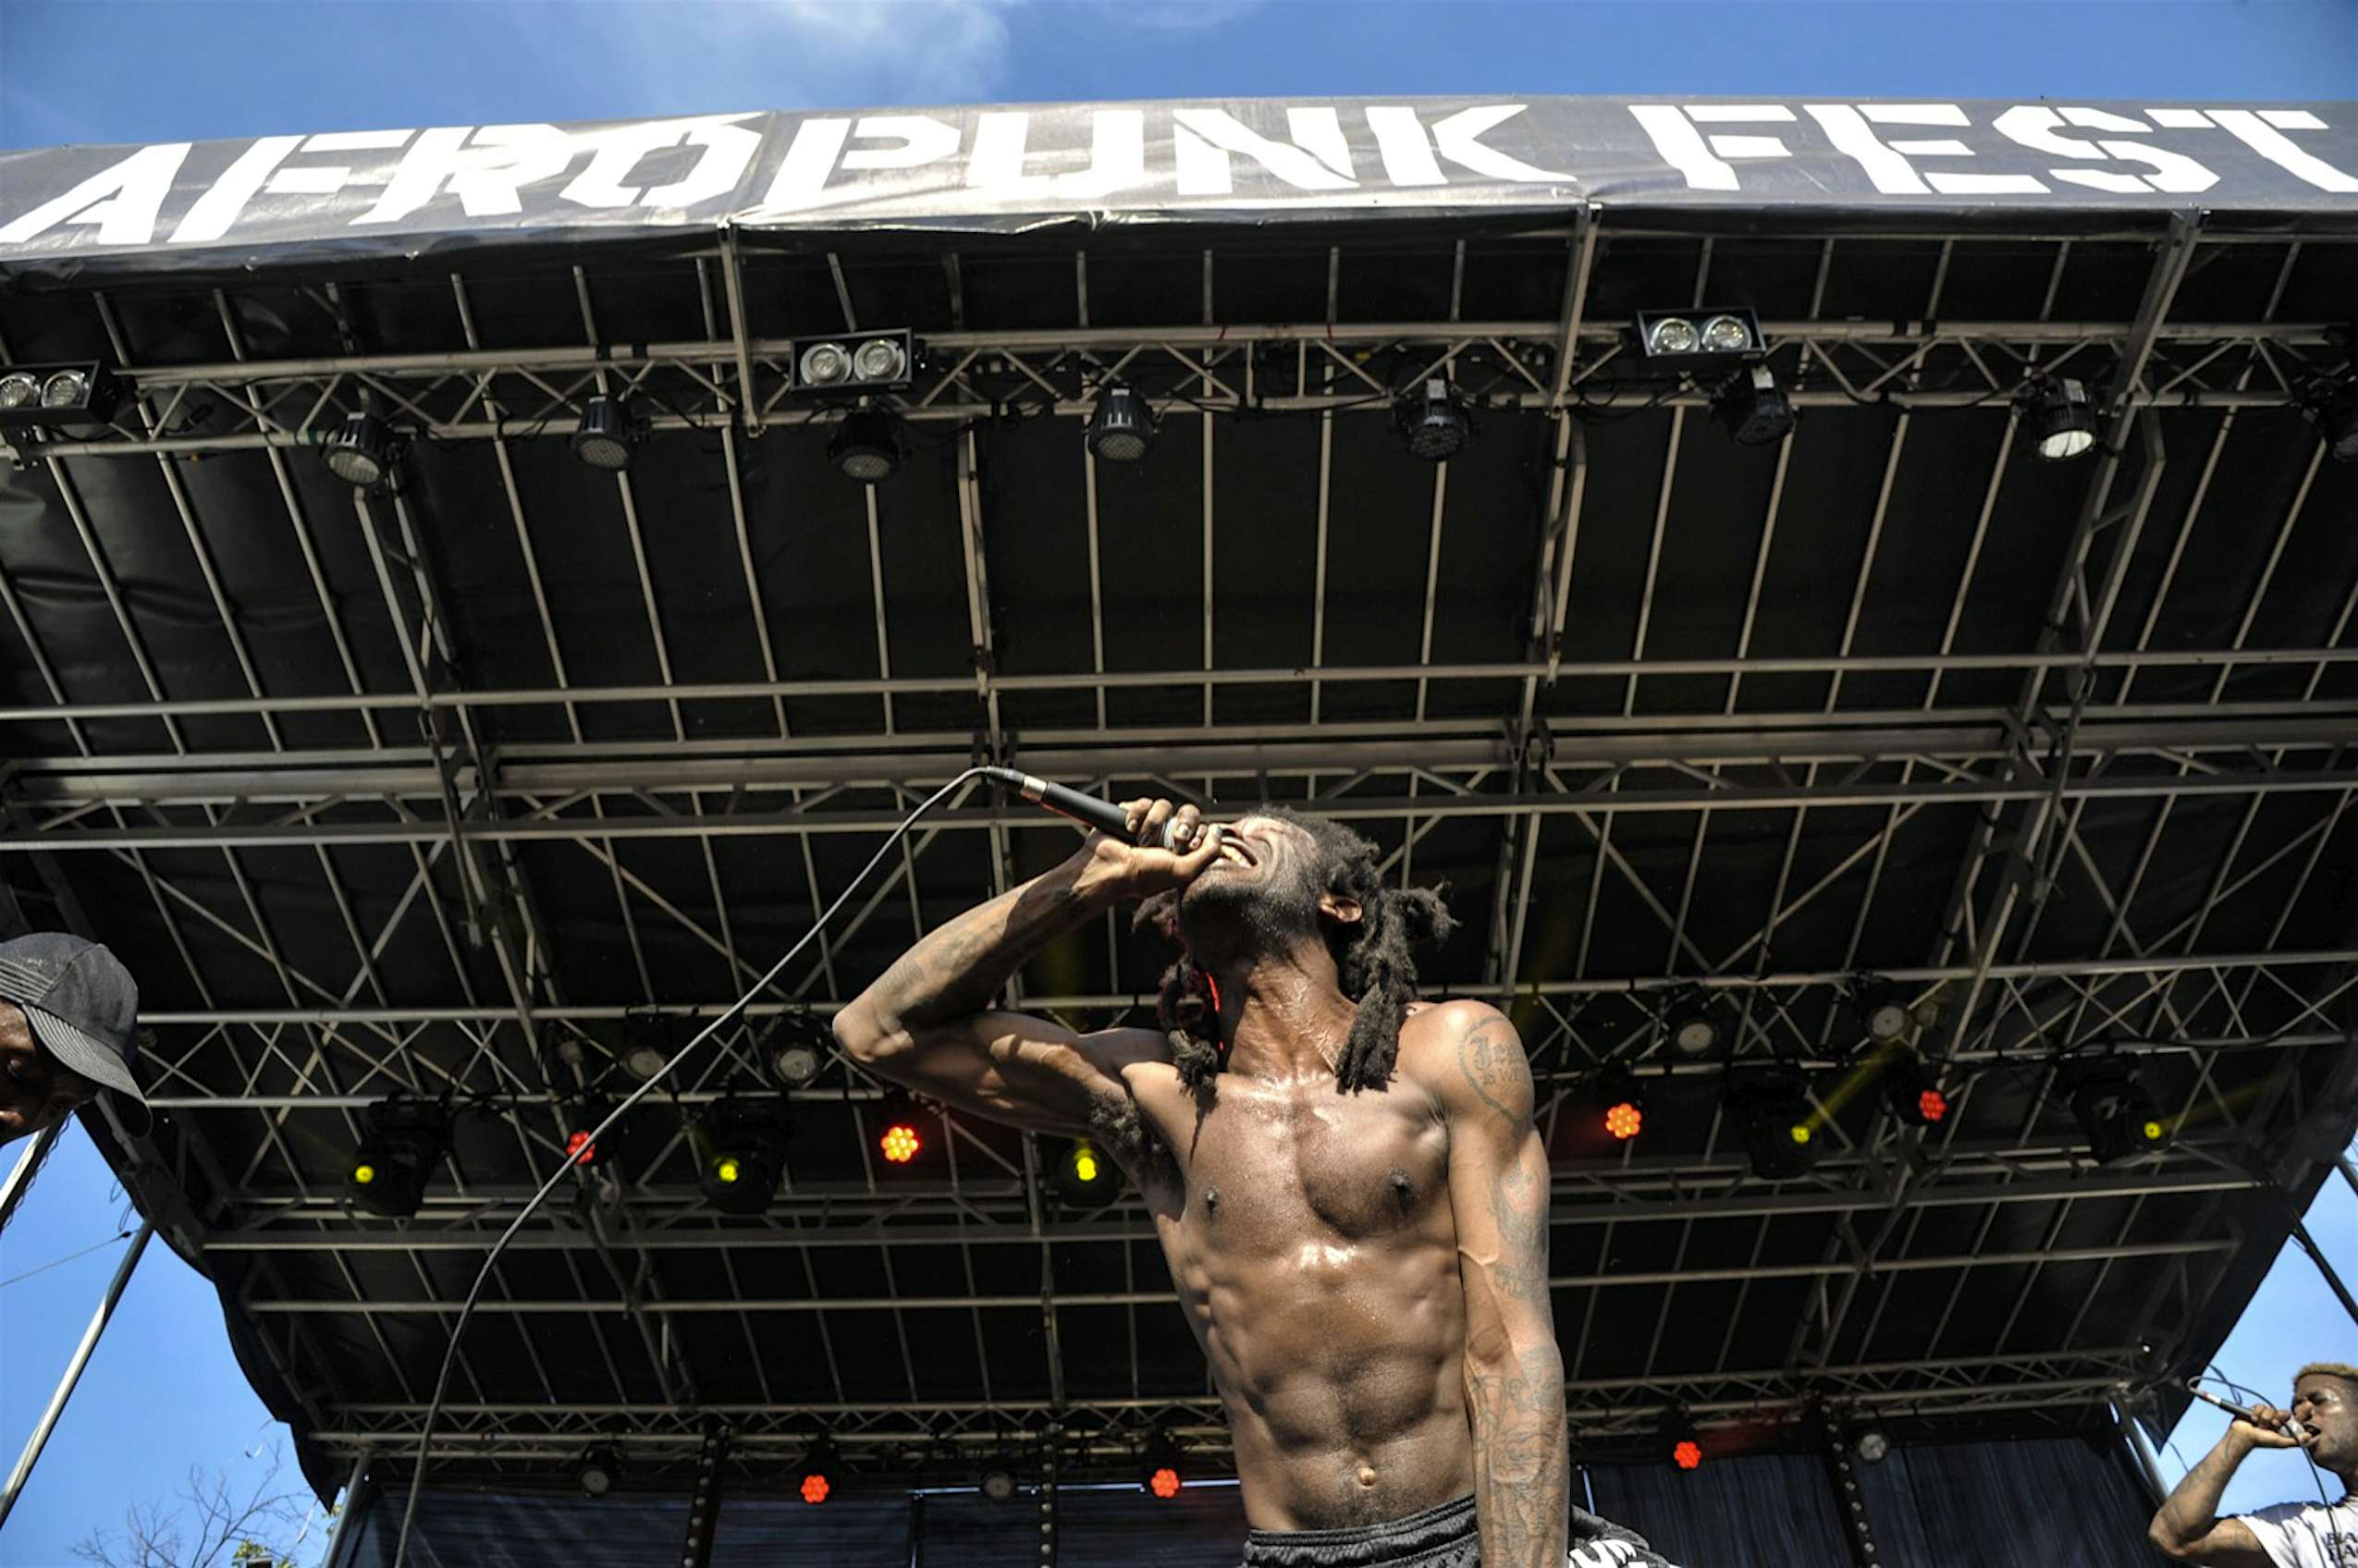 Afropunk Festival a firsttimers guide to Brooklyn's big party